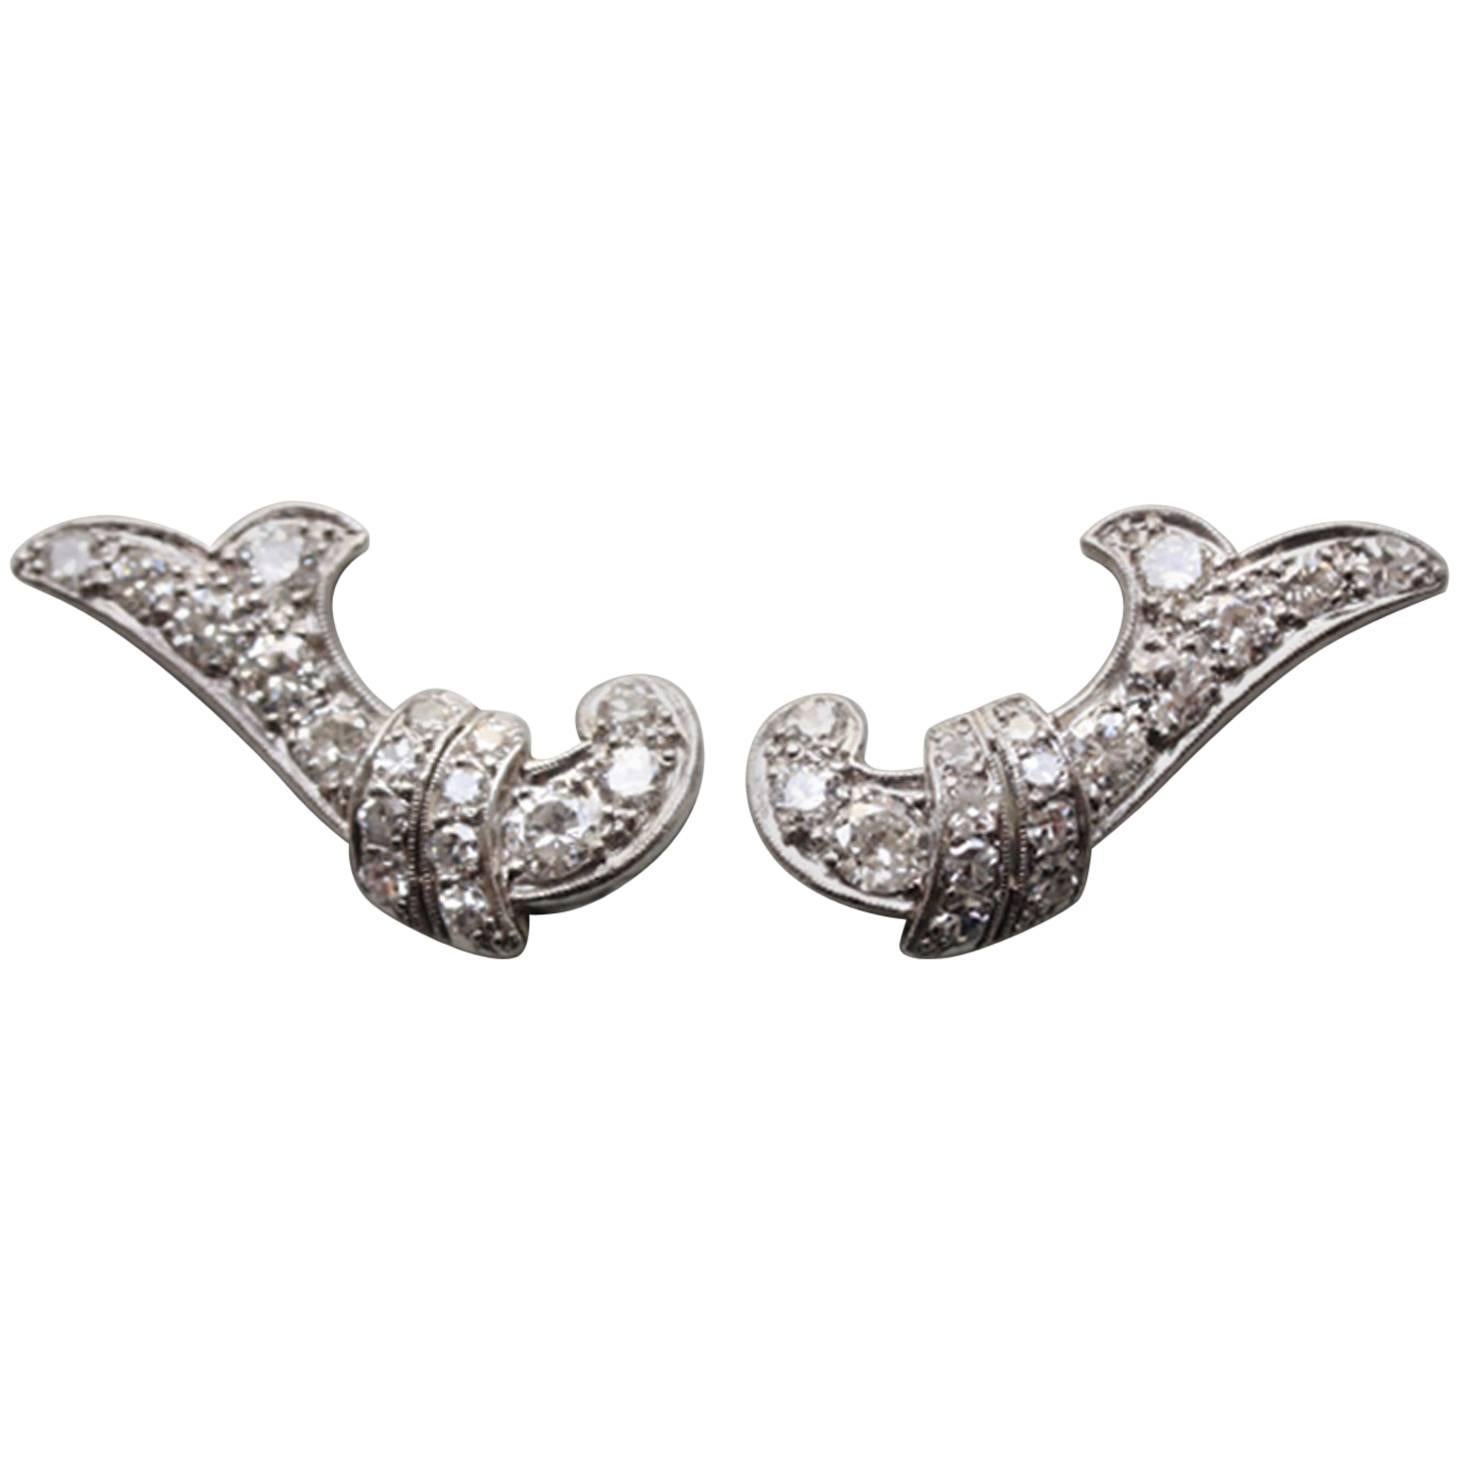 Platinum and White Gold and Diamond Earclips